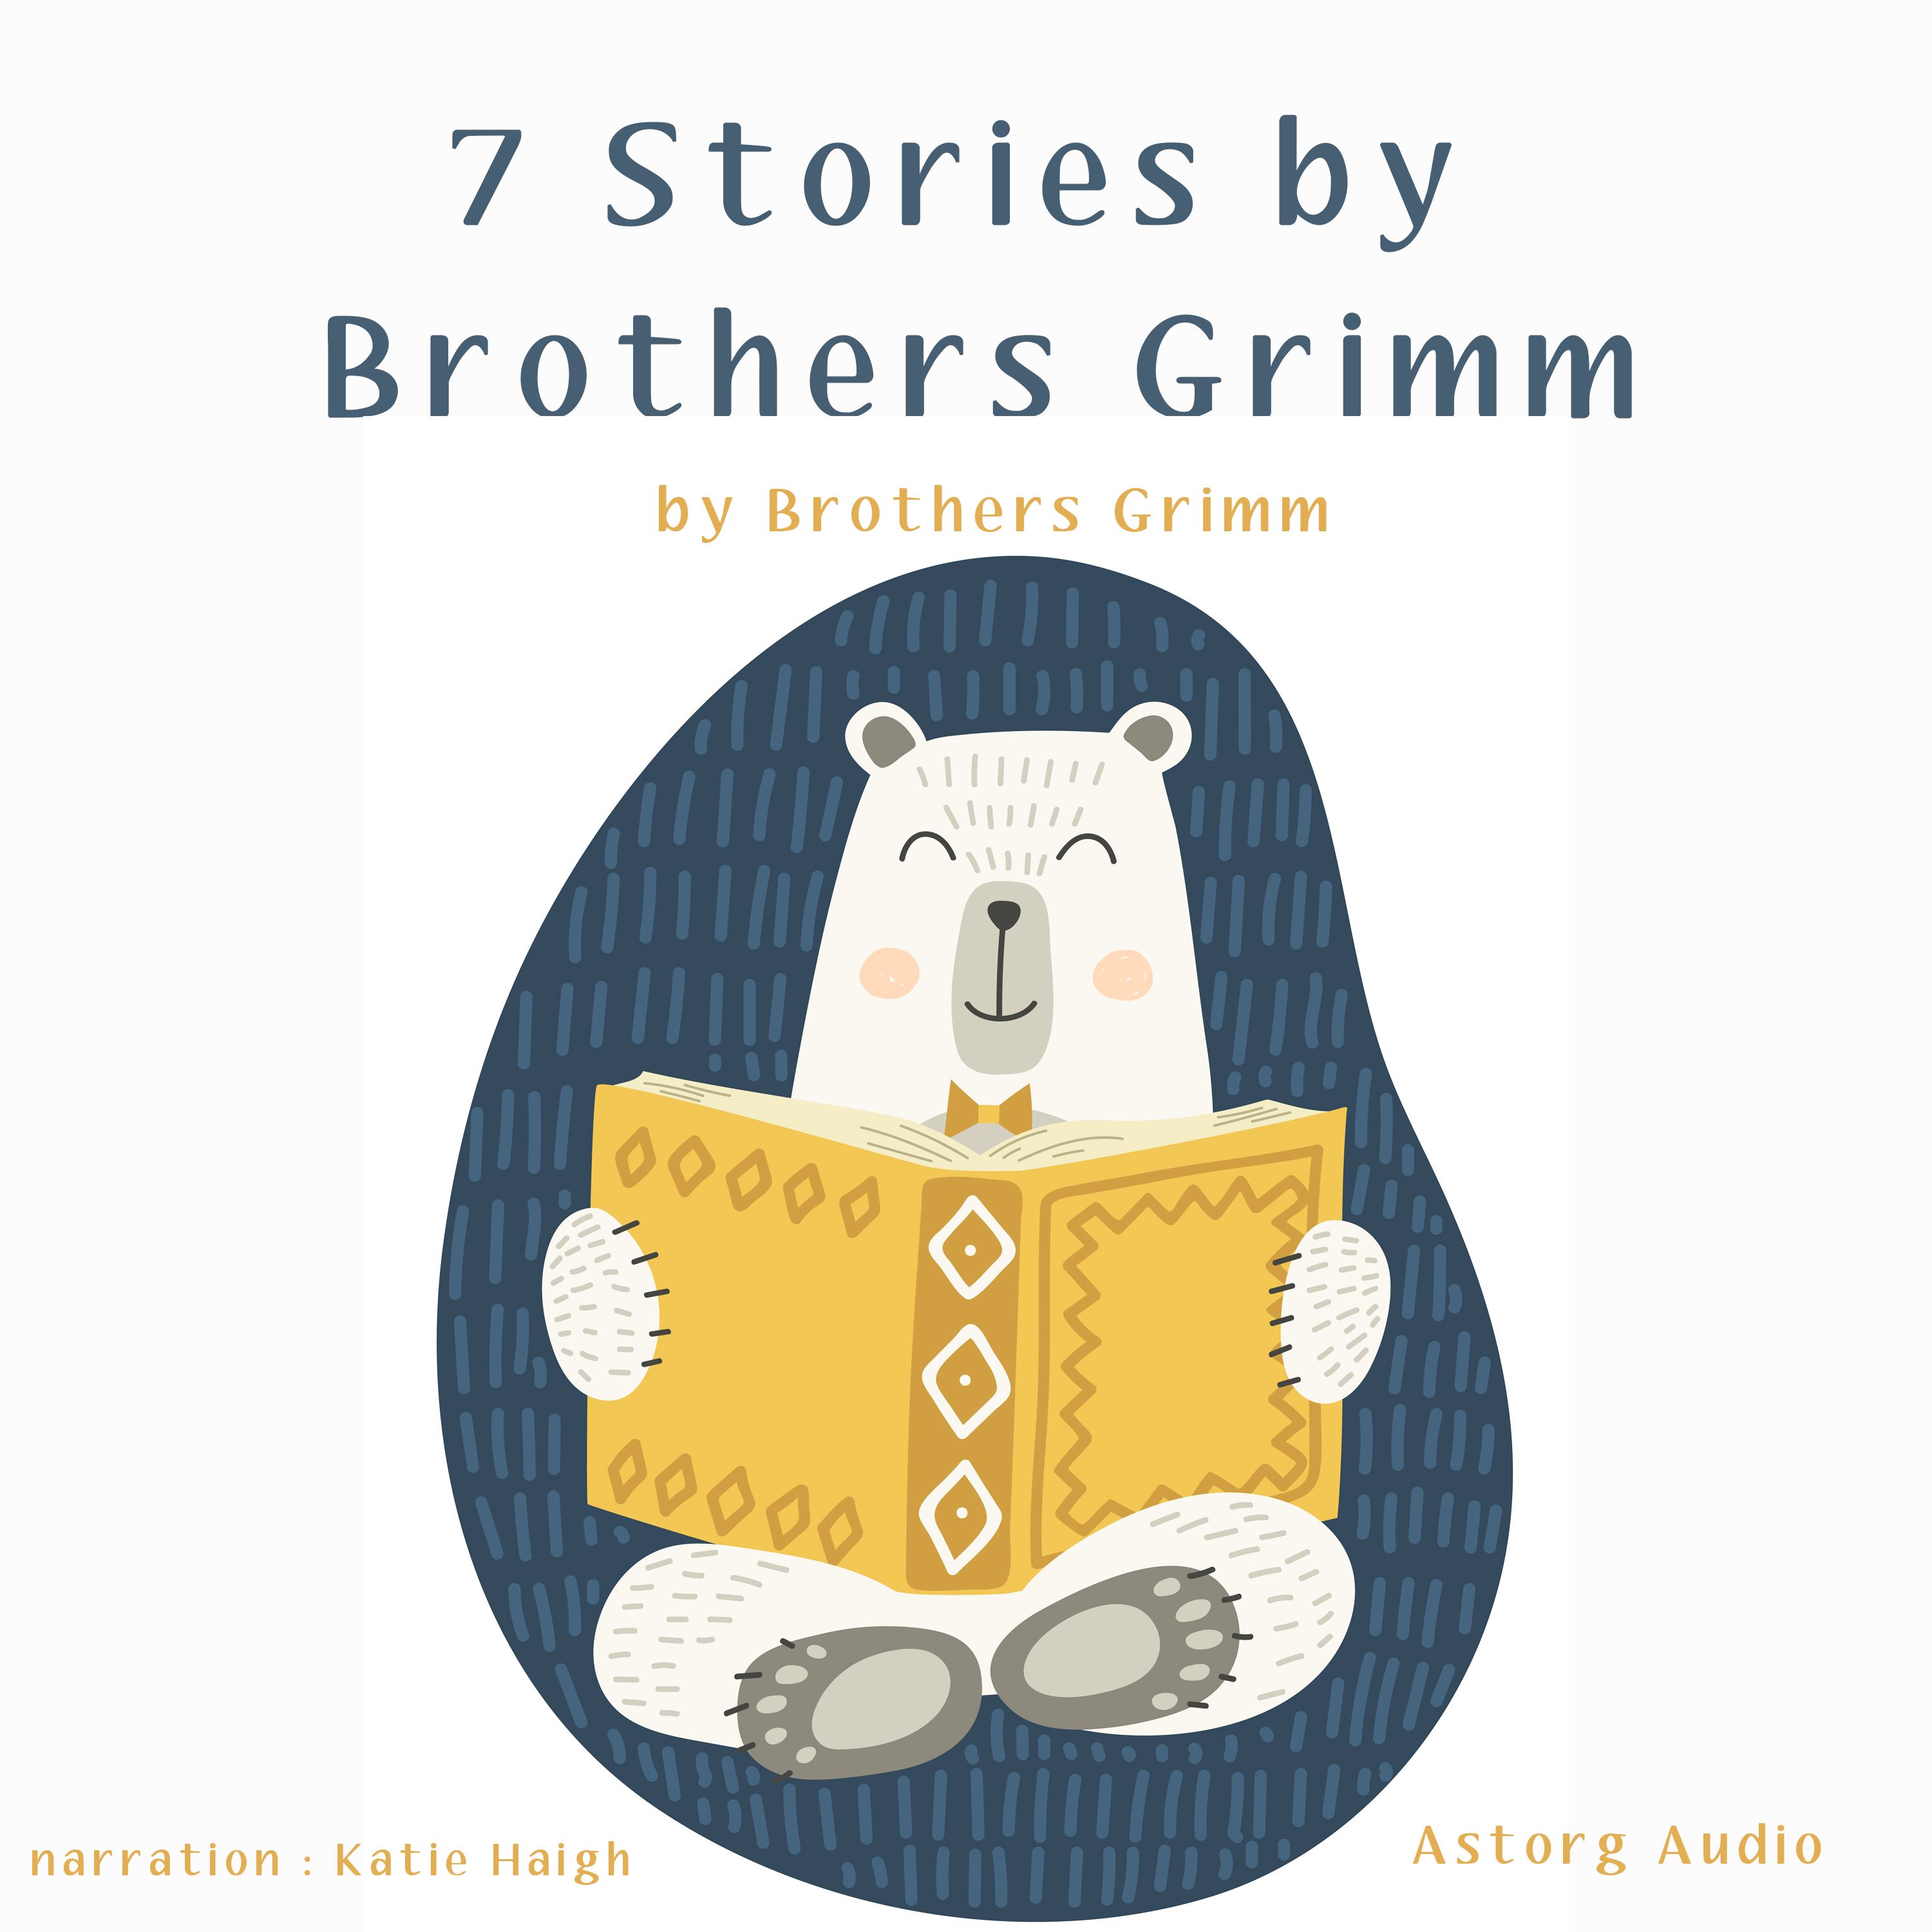 7 Stories by Brothers Grimm, audiobook by Brothers Grimm